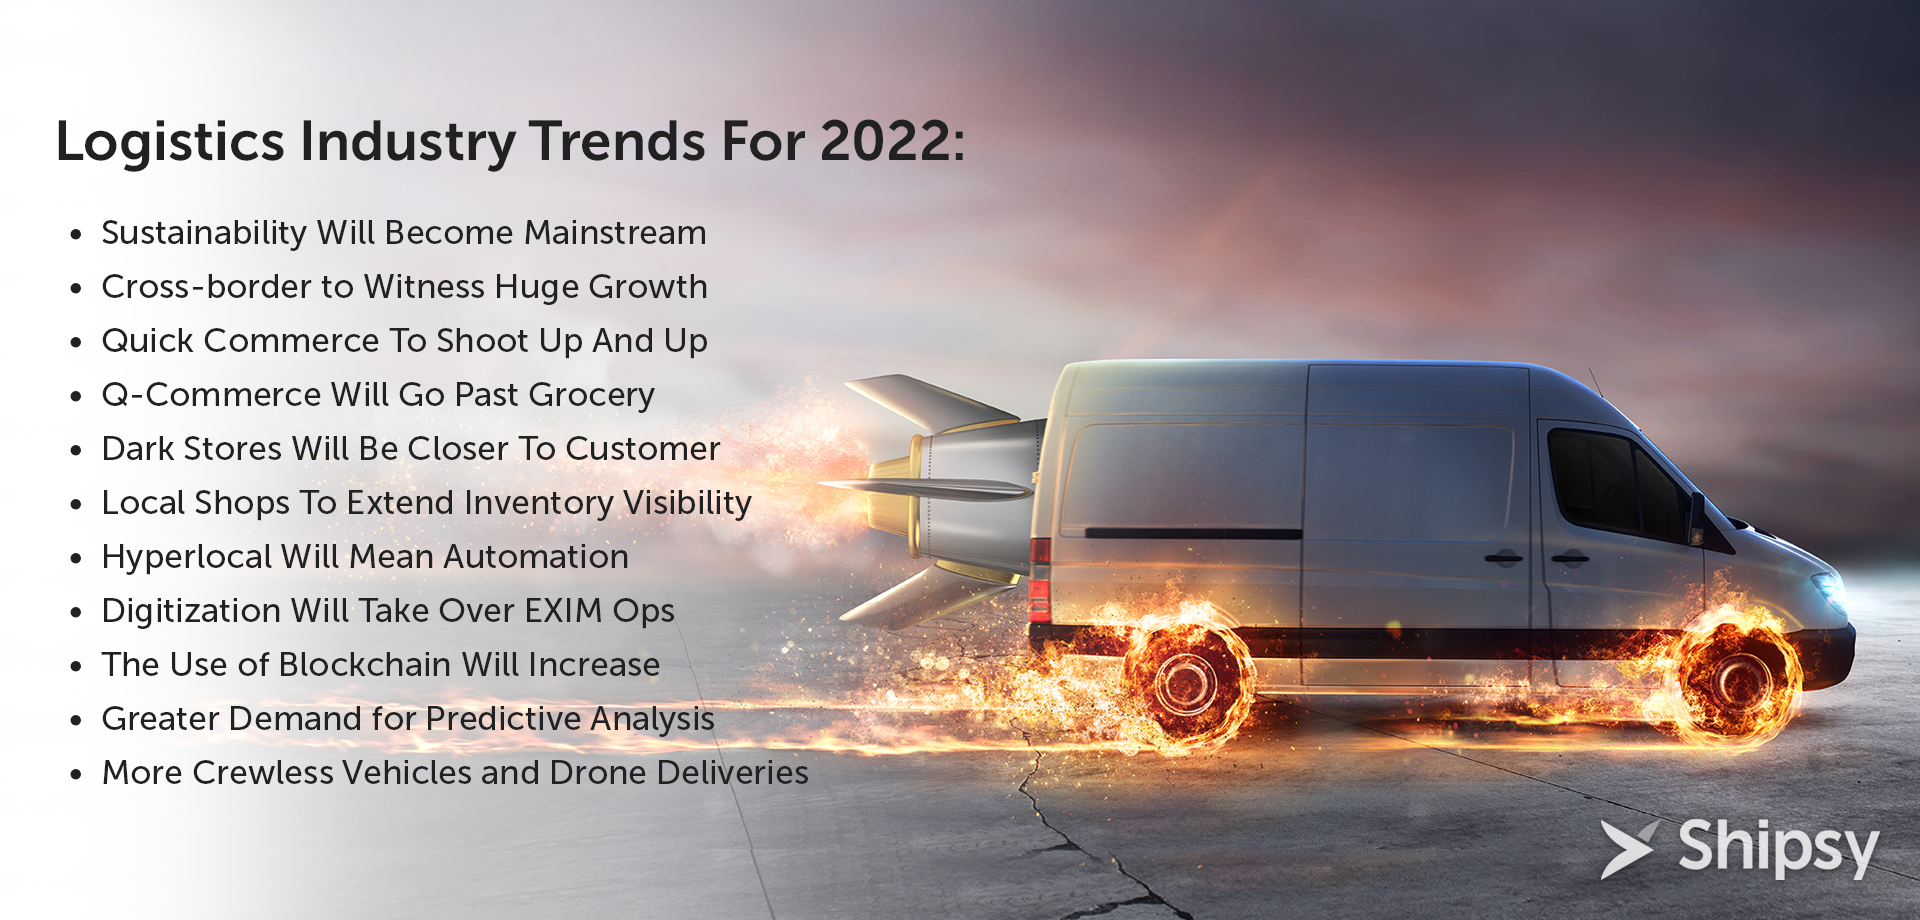 Logistics Industry Trends For 2022